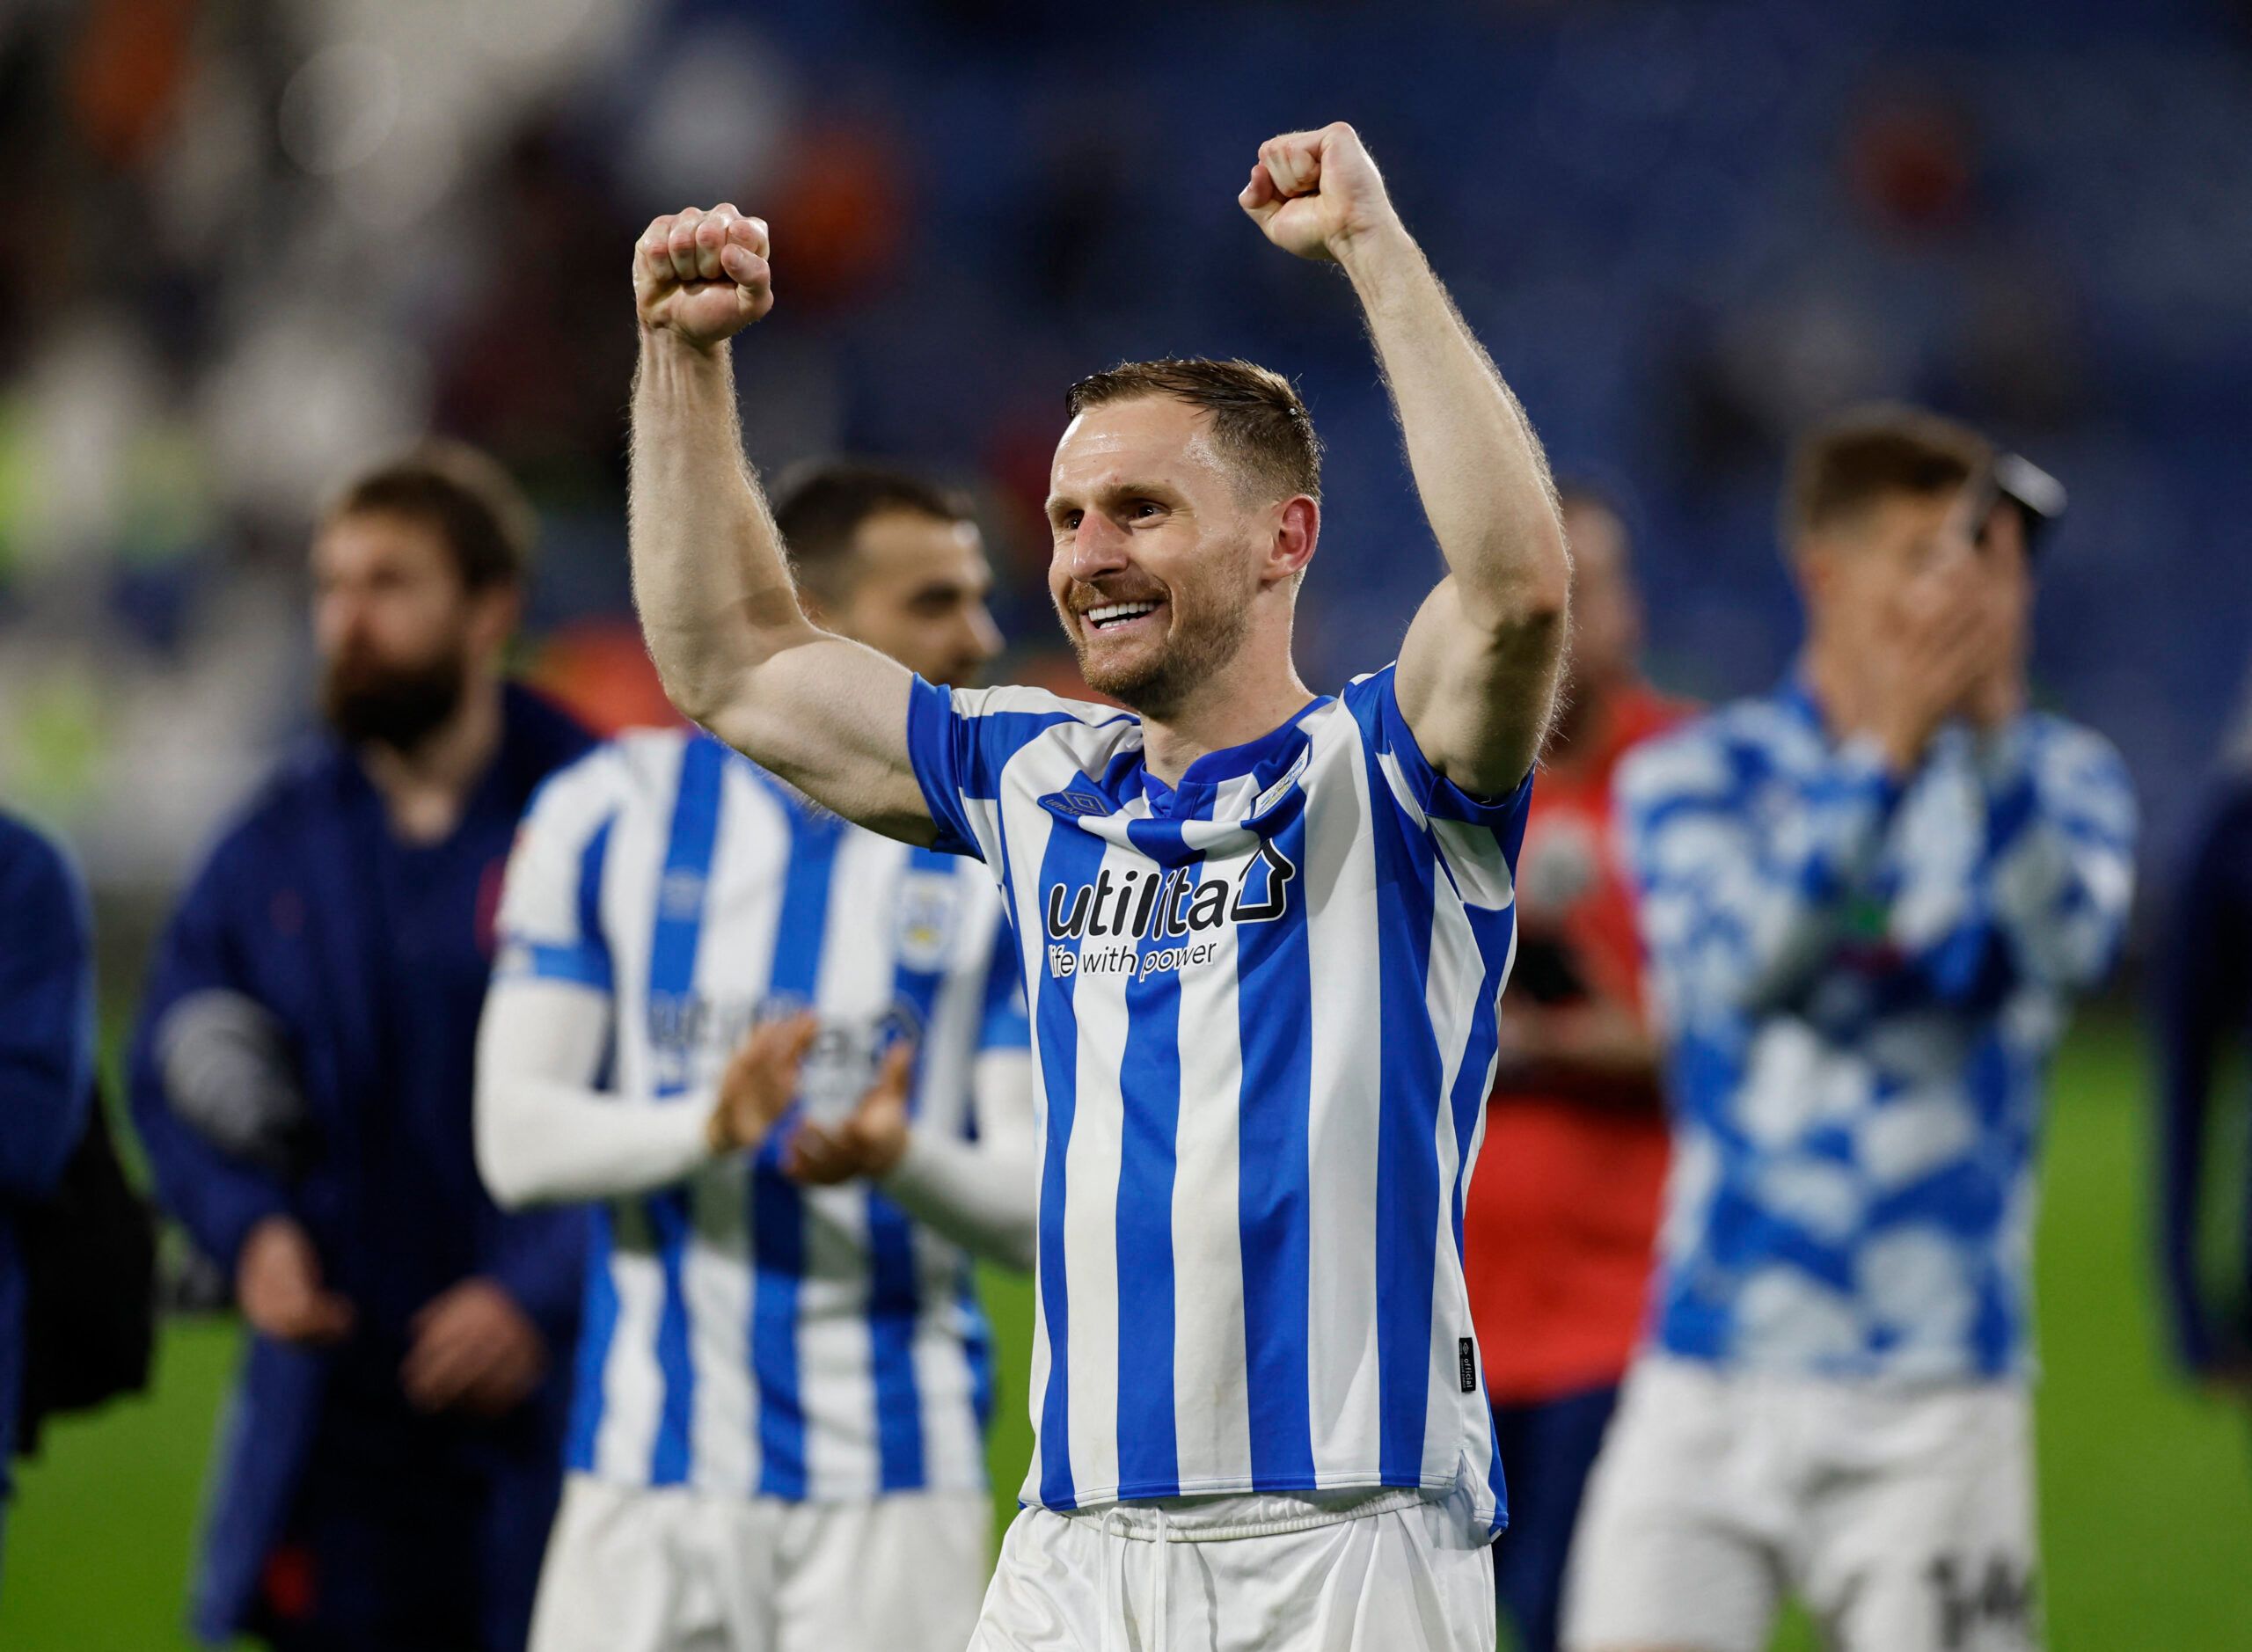 Soccer Football - Championship - Play-Offs Second Leg - Huddersfield Town v Luton Town - John Smith's Stadium, Huddersfield, Britain - May 16, 2022 Huddersfield Town's Tom Lees celebrates after reaching the Championship Play-Off Final Action Images via Reuters/Jason Cairnduff